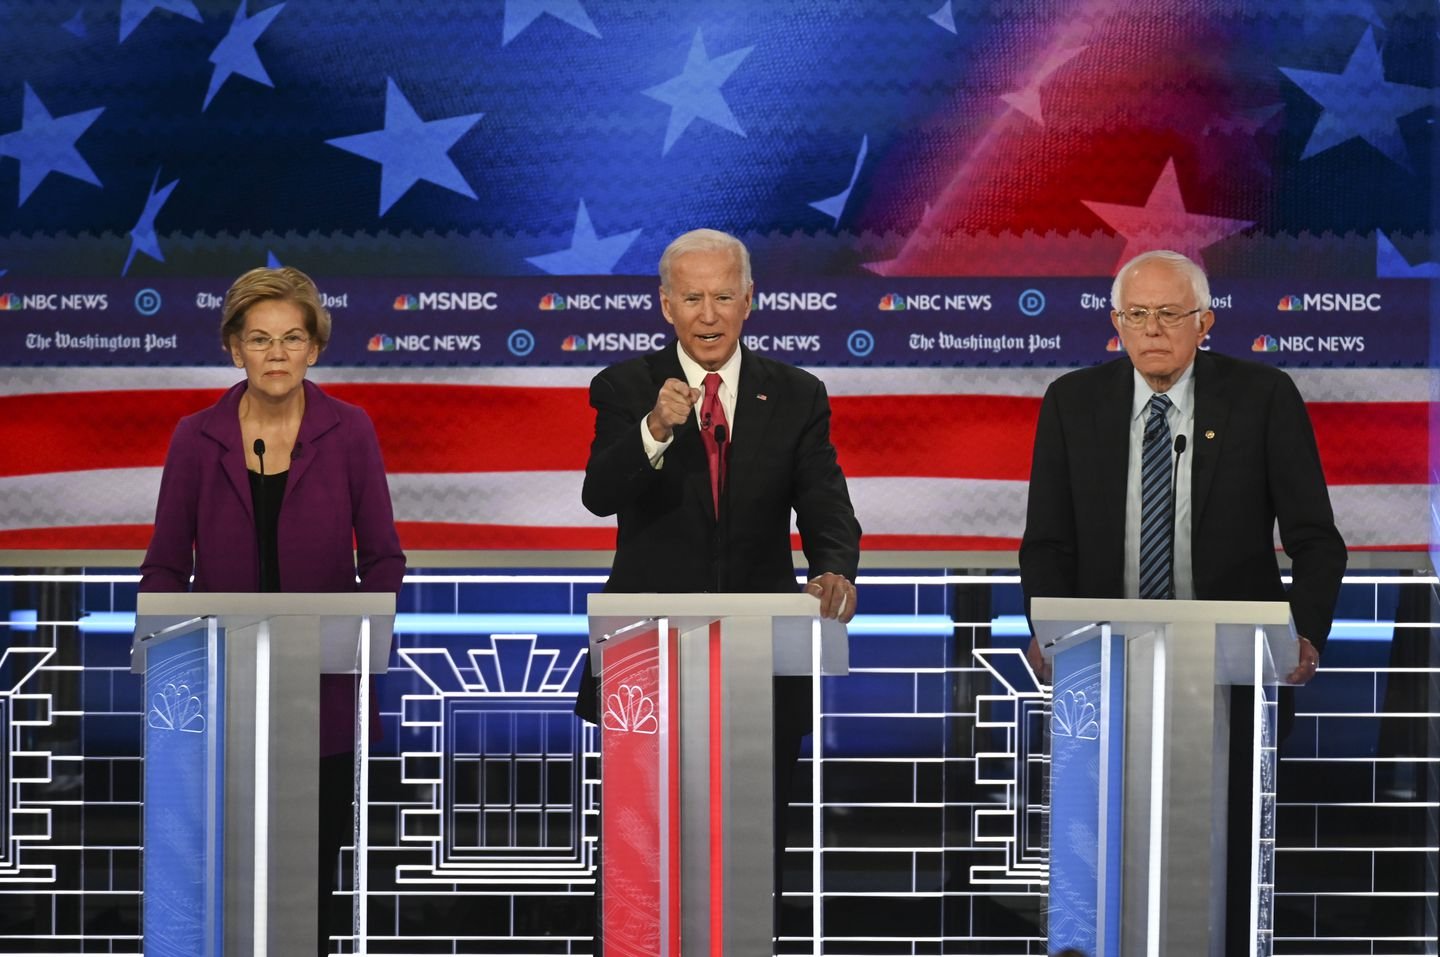 Beating Trump, rather than beating up on each other, was focus of fifth Democratic debate